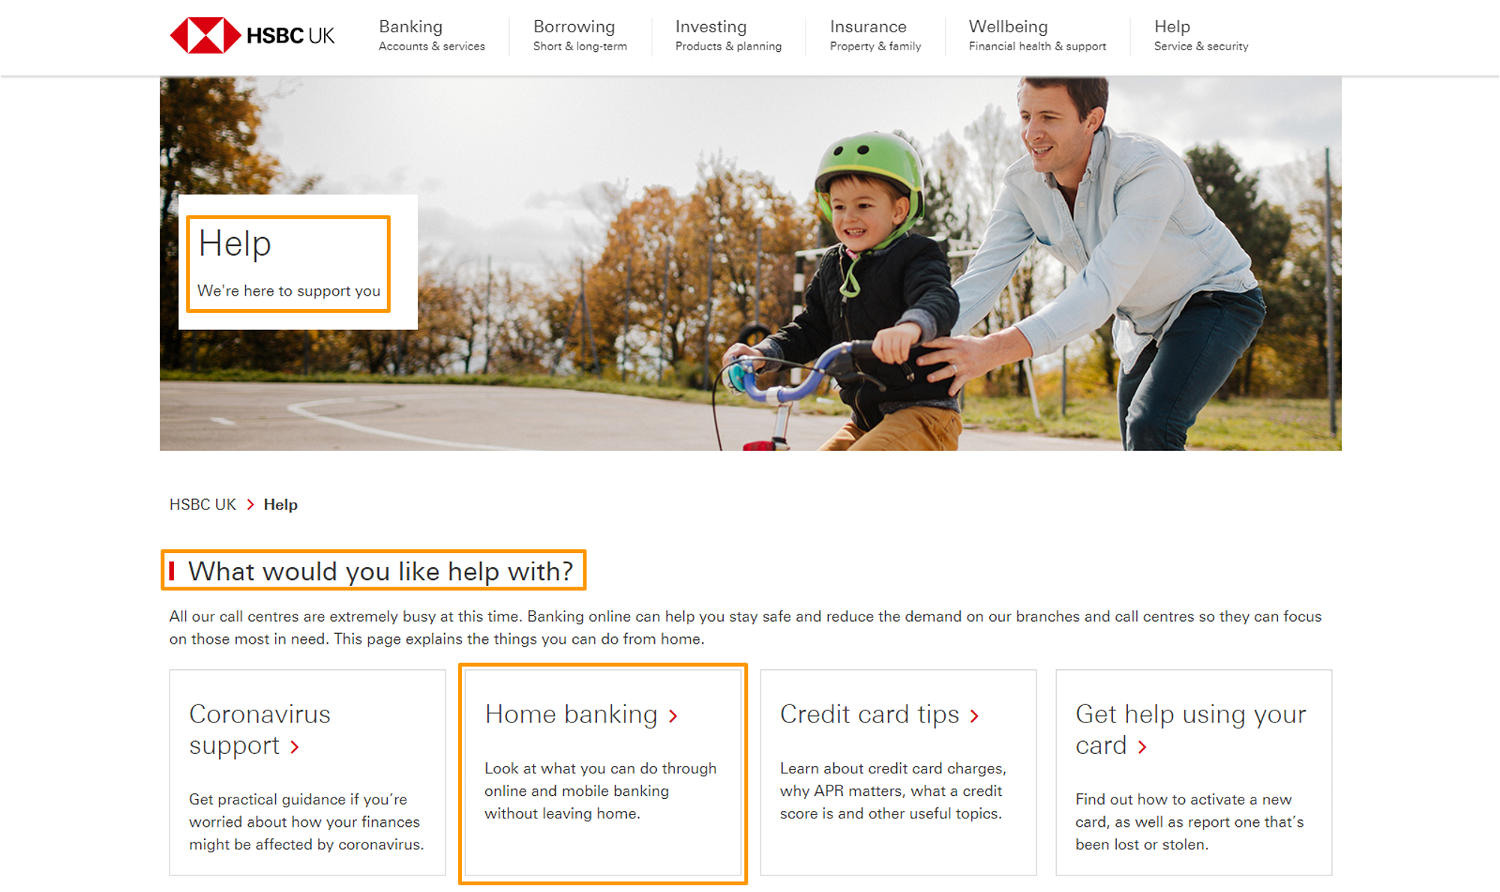 HSBC's support page has helpful microcopy and categories structure